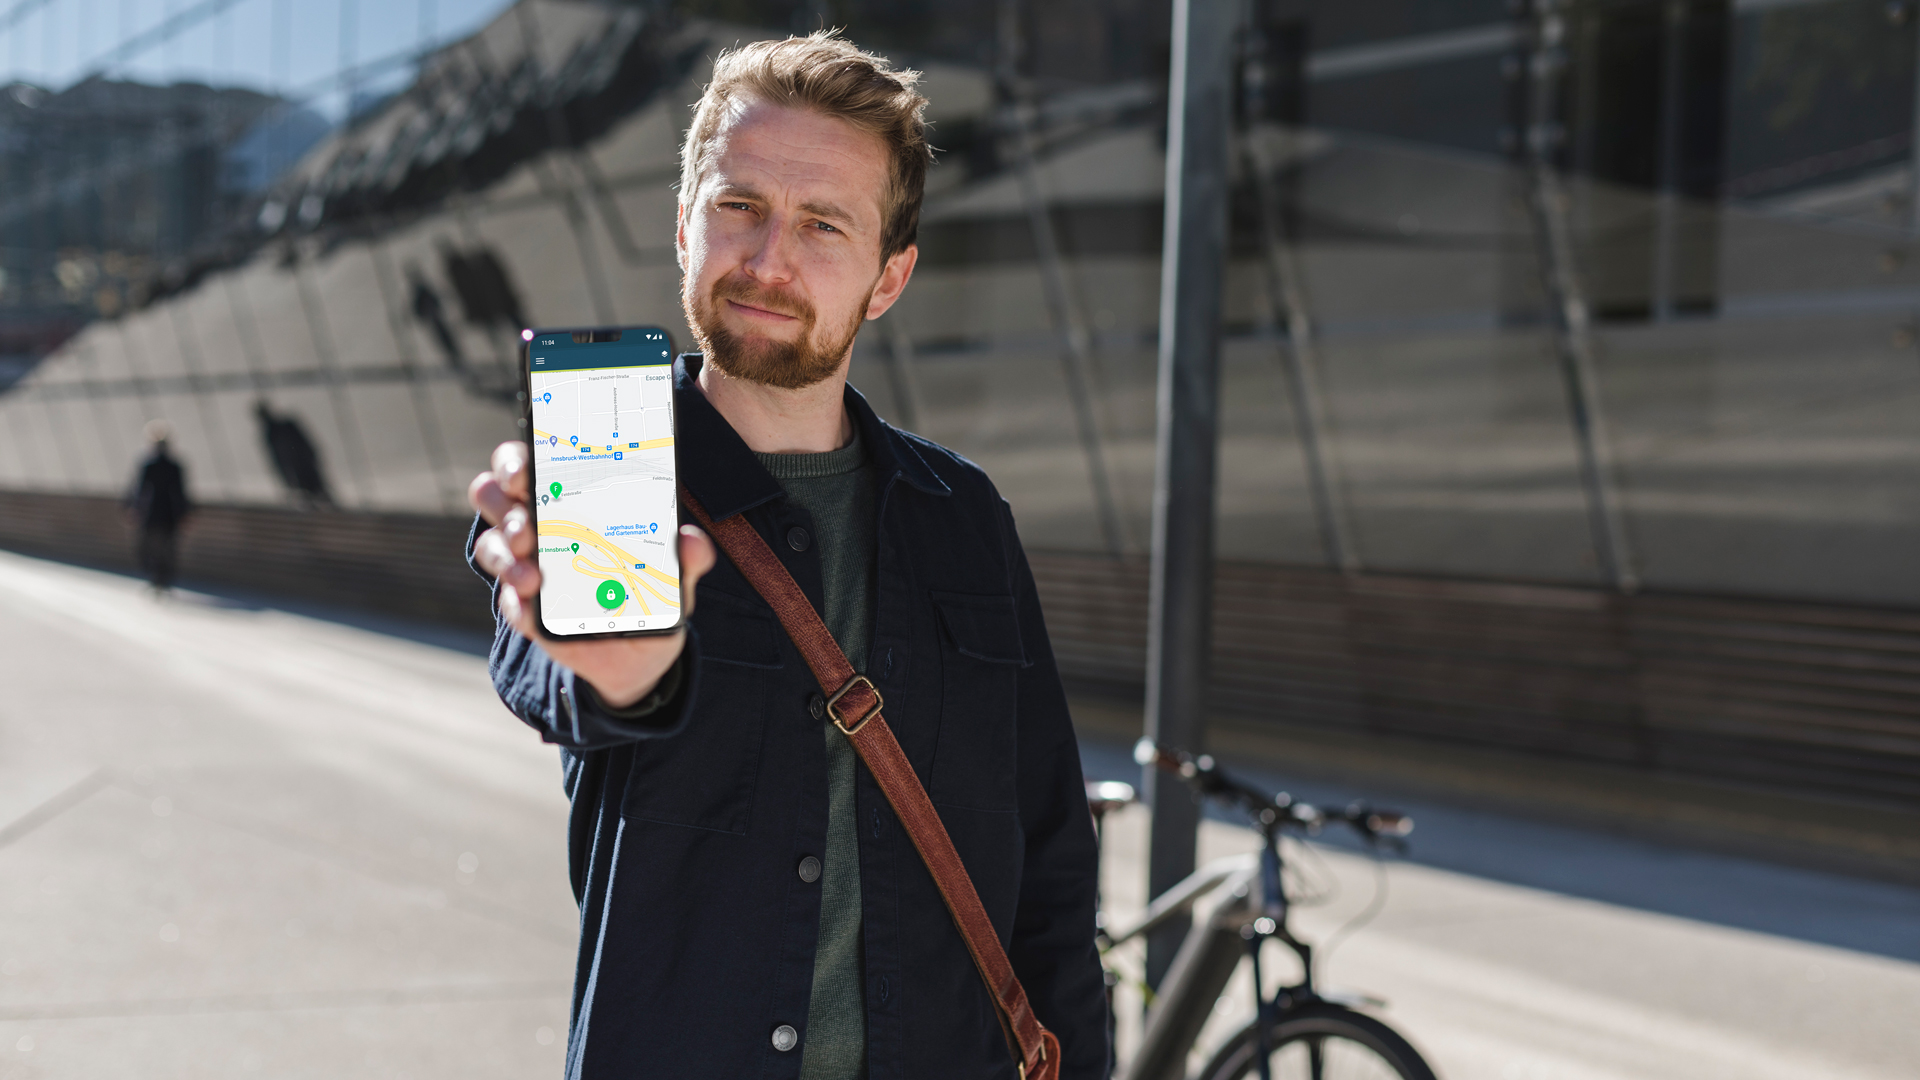 The app becomes the interface between people and e-bikes. Ideal as a starting point for manufacturers to increase the attractiveness of their e-bikes.